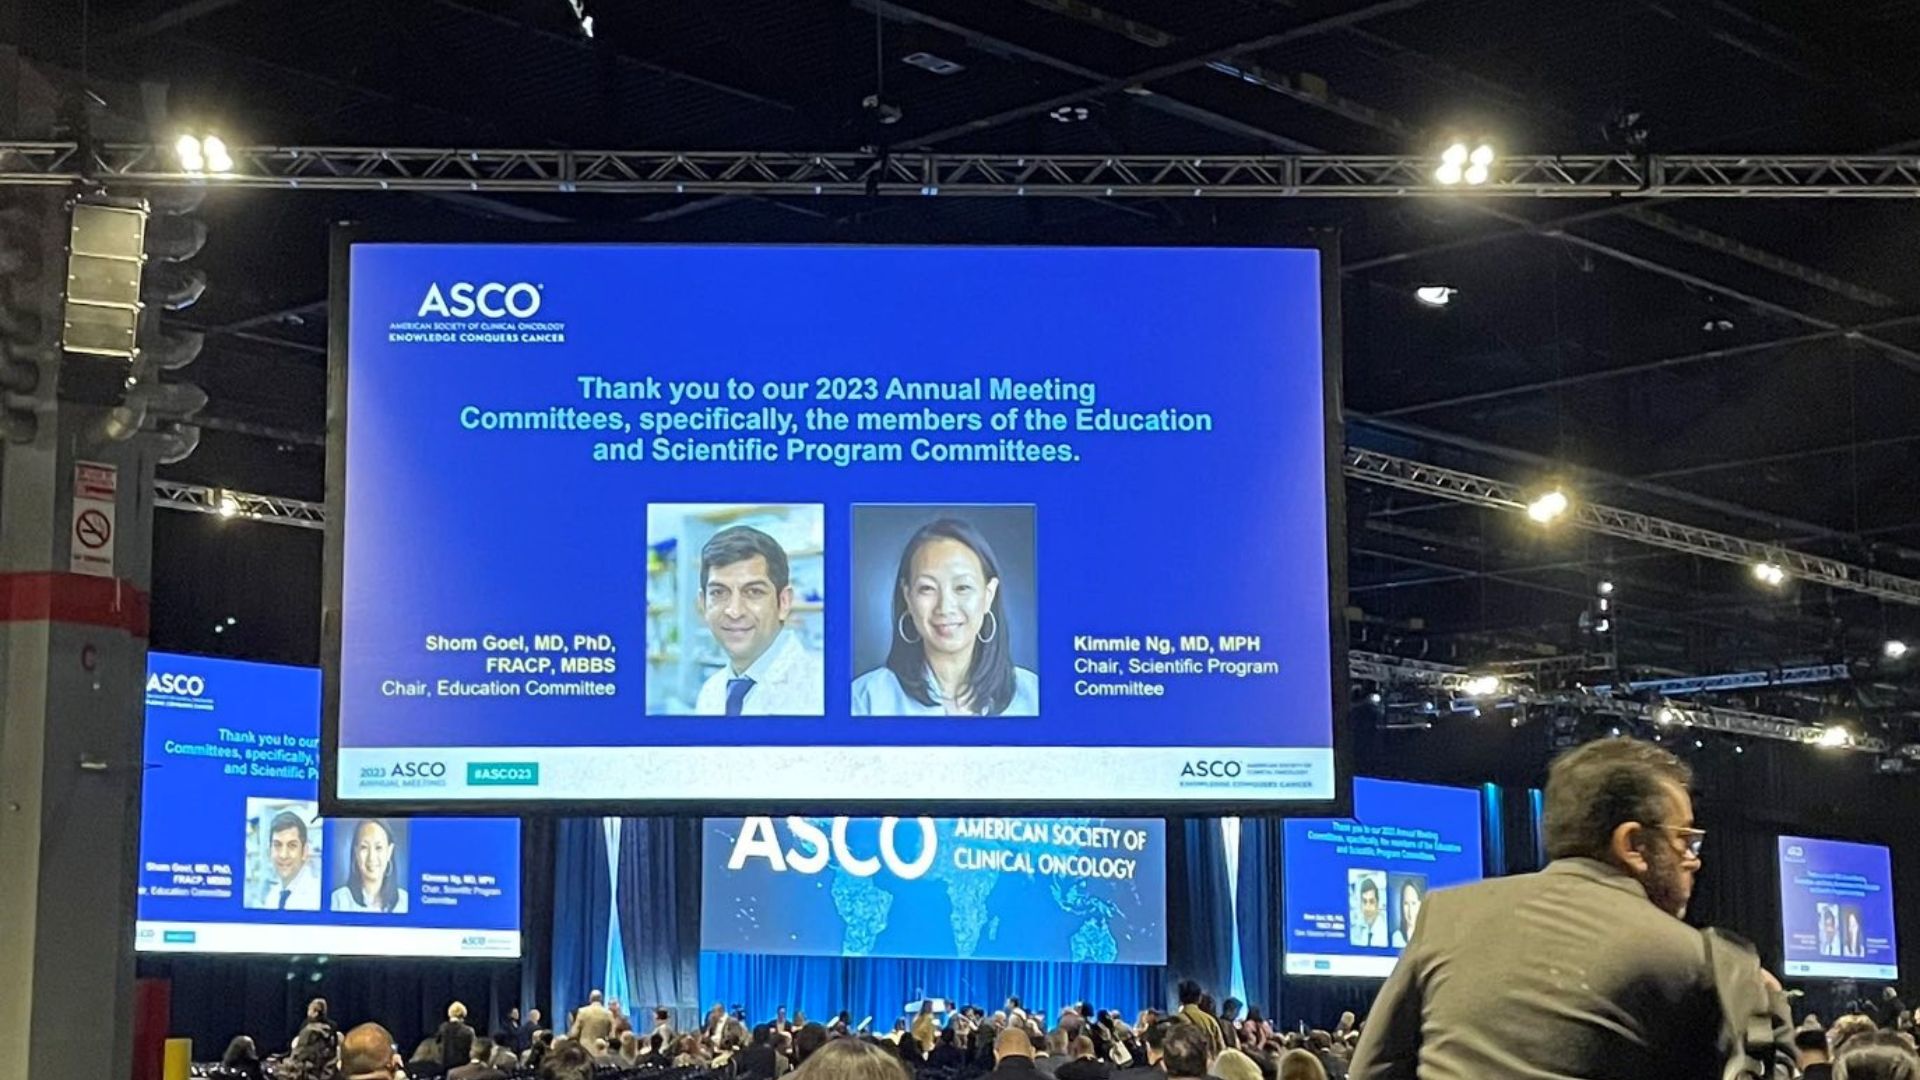 Peter Mac staff take centre stage at ASCO